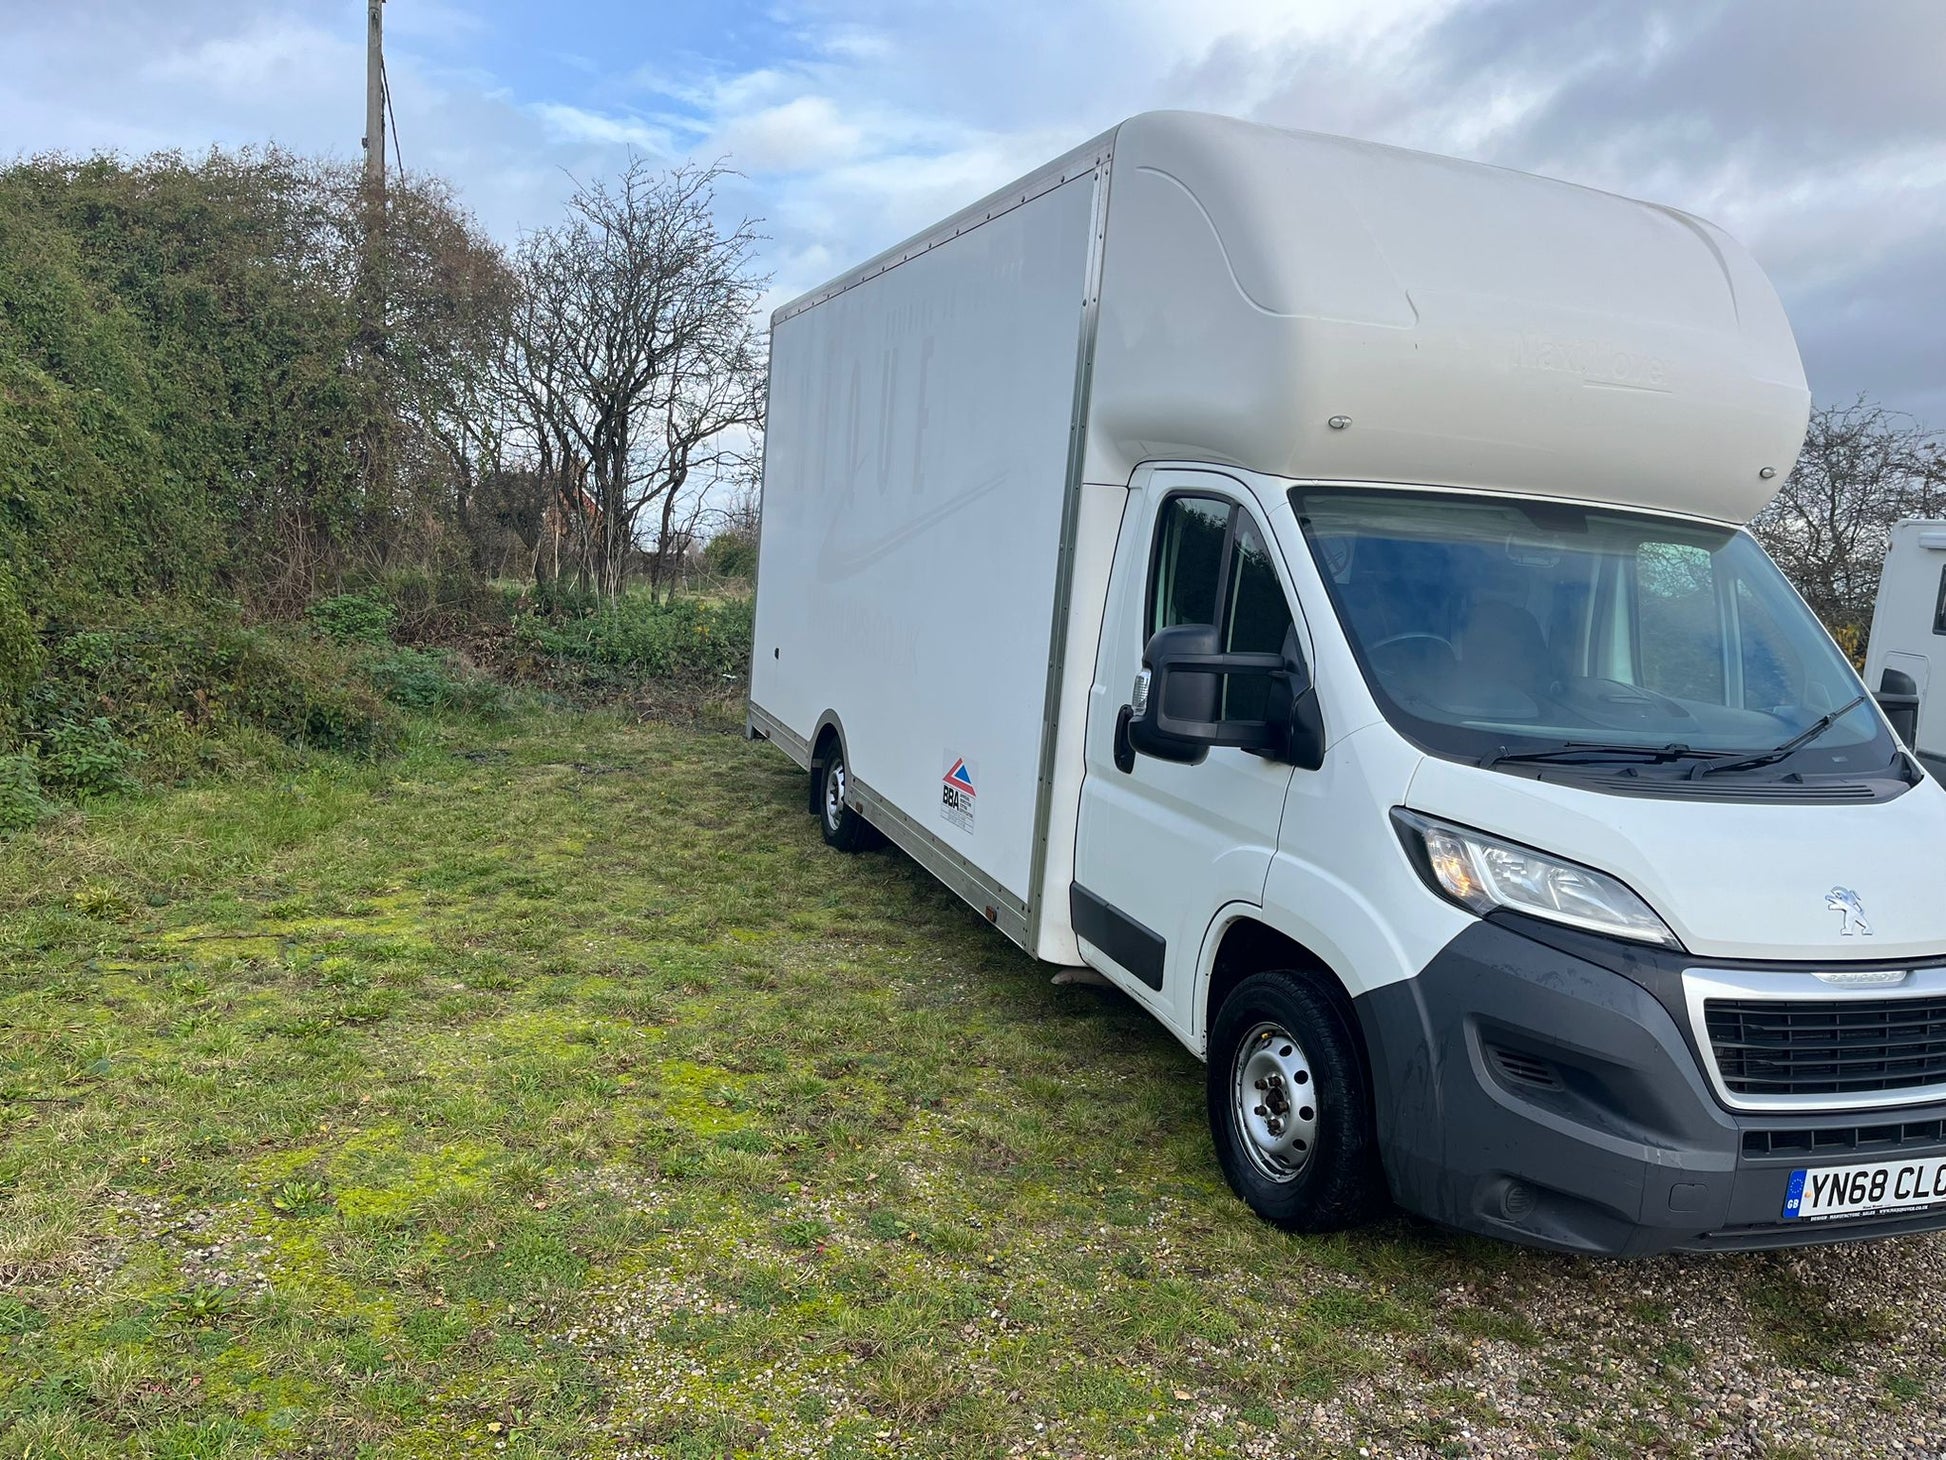 Bid on ONE OWNER GEM: 2018 PEUGEOT BOXER BOX VAN- Buy &amp; Sell on Auction with EAMA Group